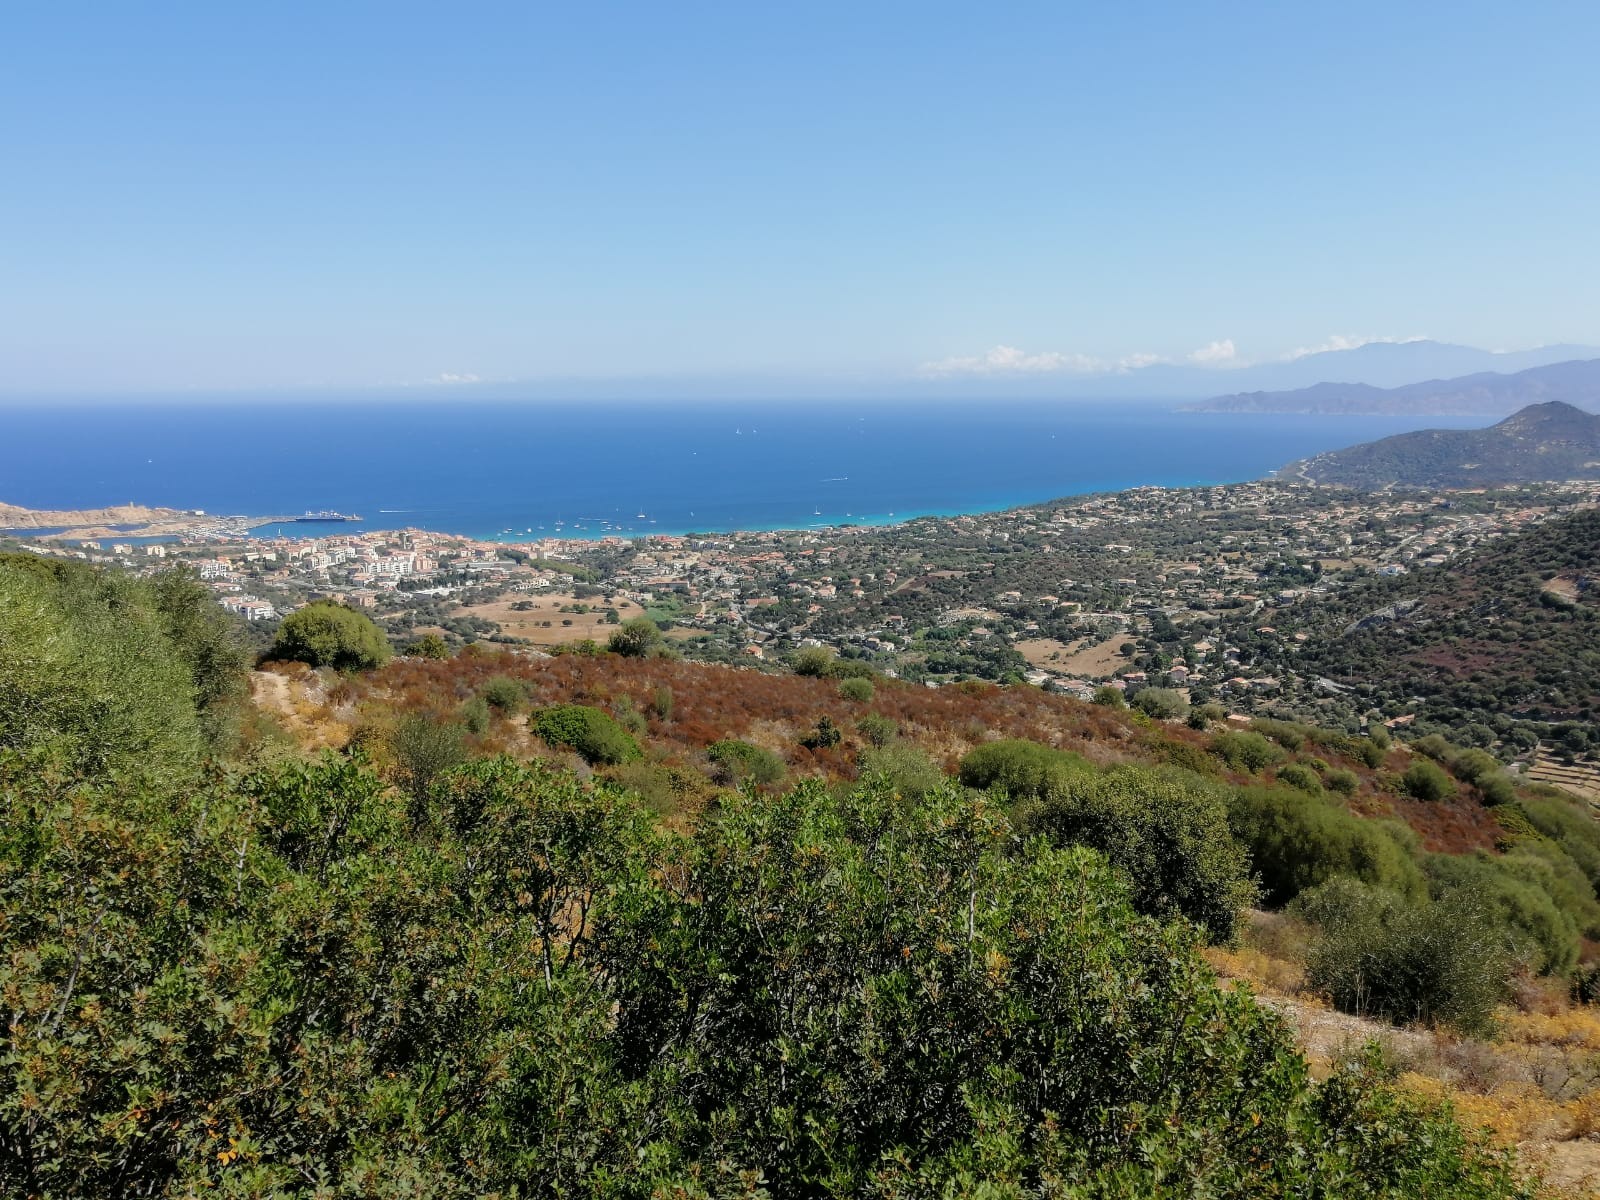 View of Ile Rousse from Occiglioni village